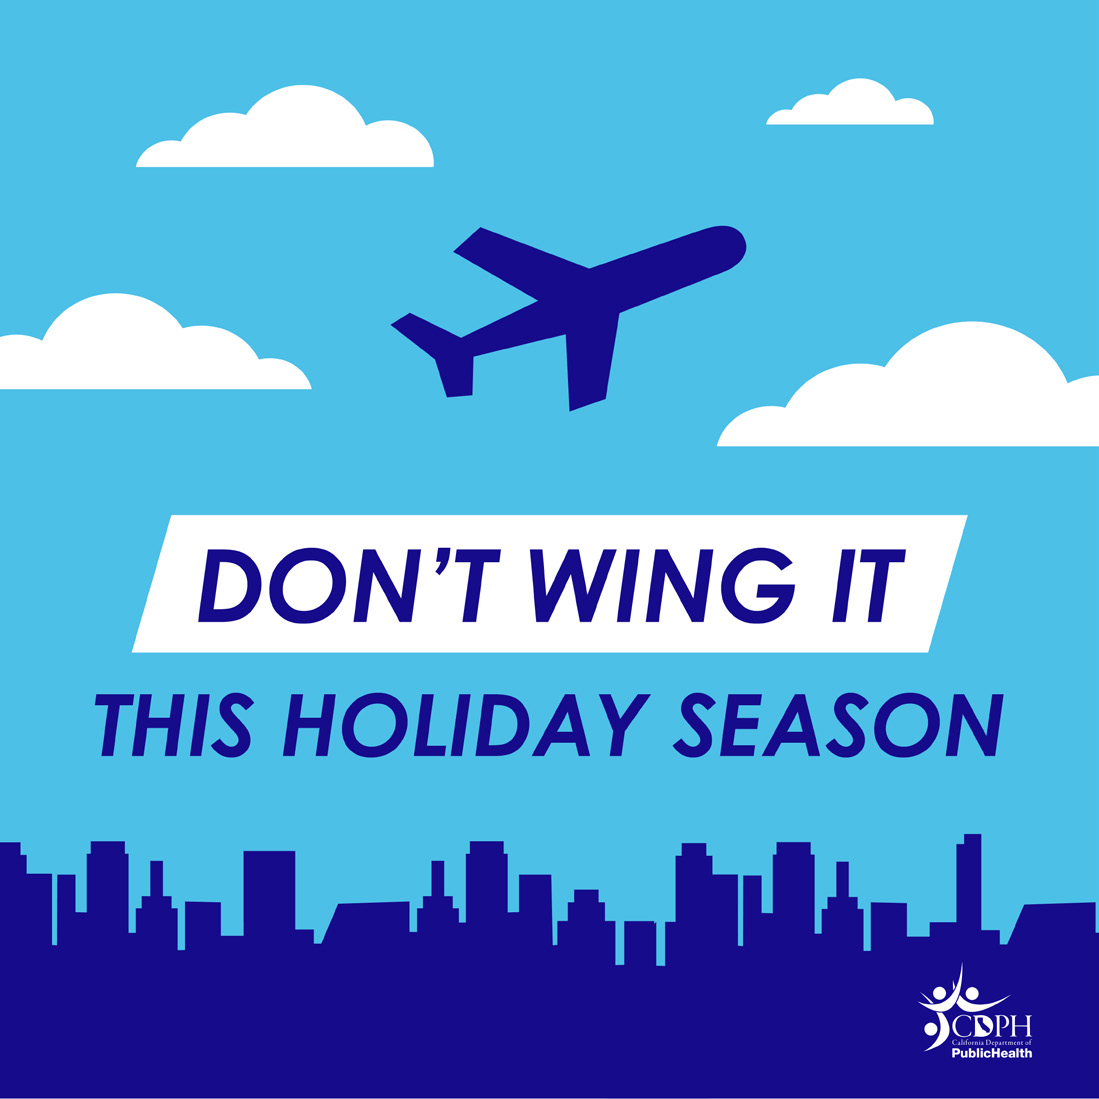 Don't wing it this holiday season